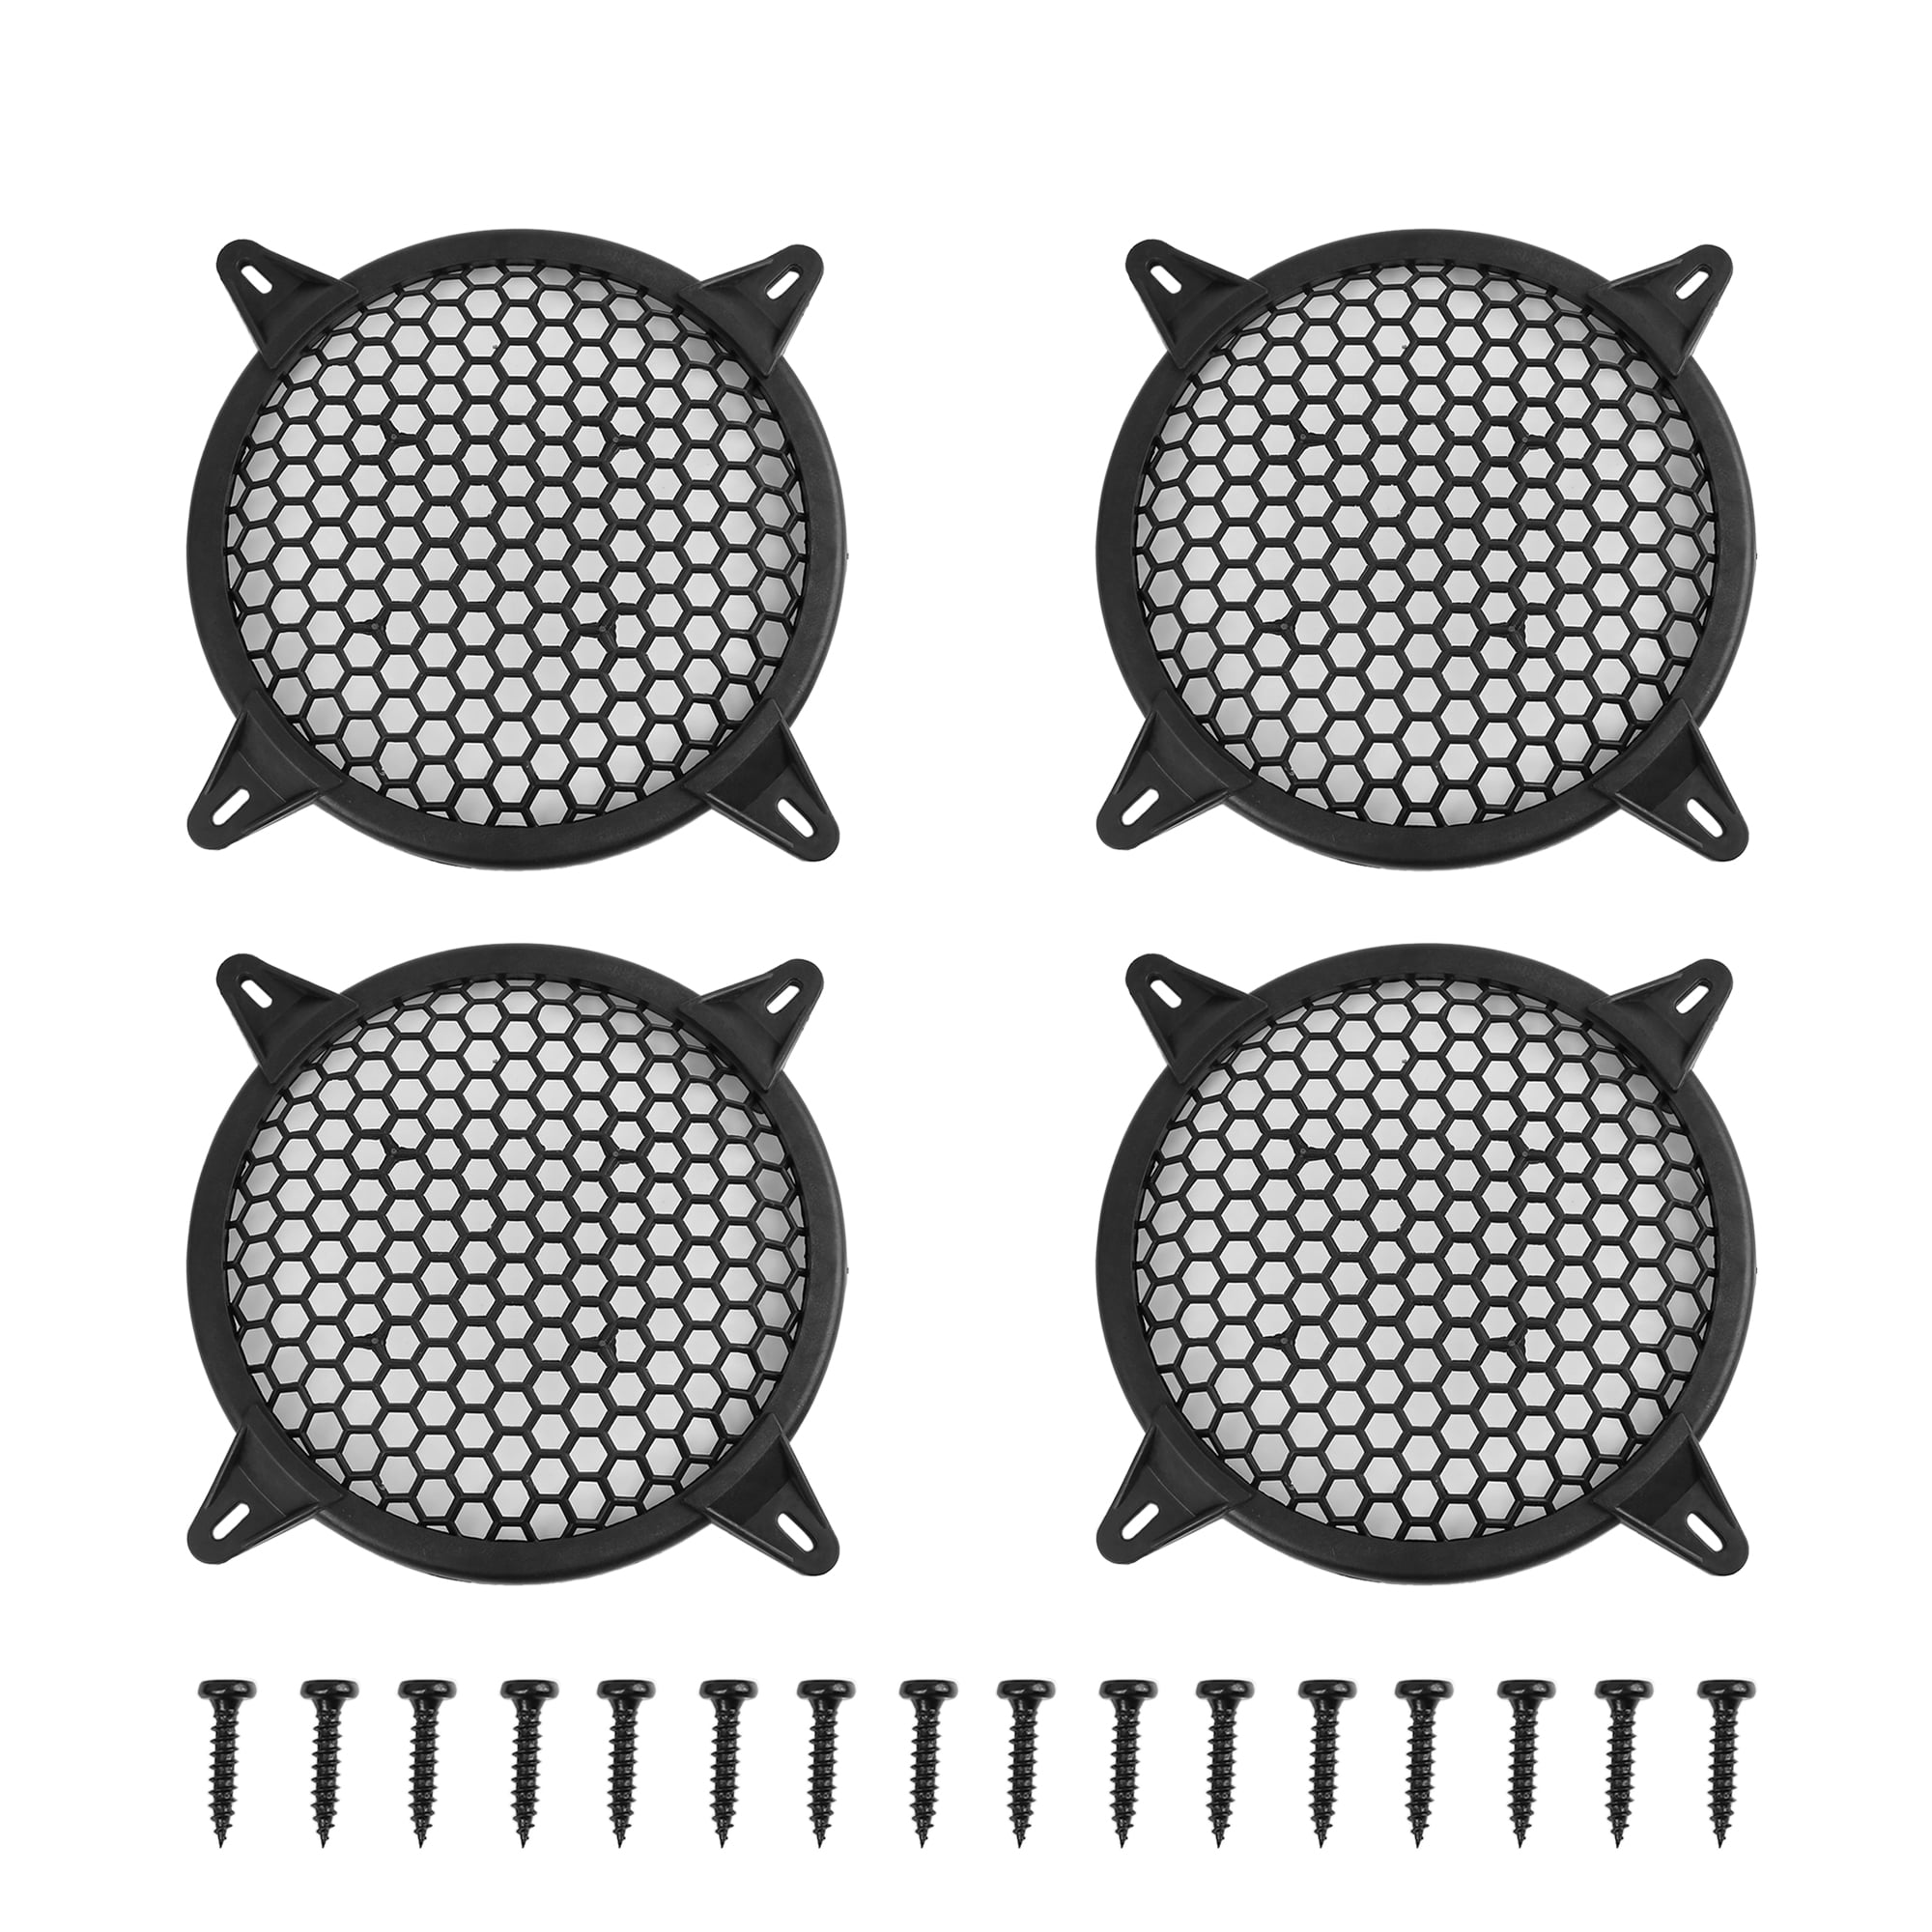 4 Inch Car Speaker Grill Cover Guard Protector Plastic Mesh Protective Case Black Circle Subwoofer Net Covers Pack of 4 